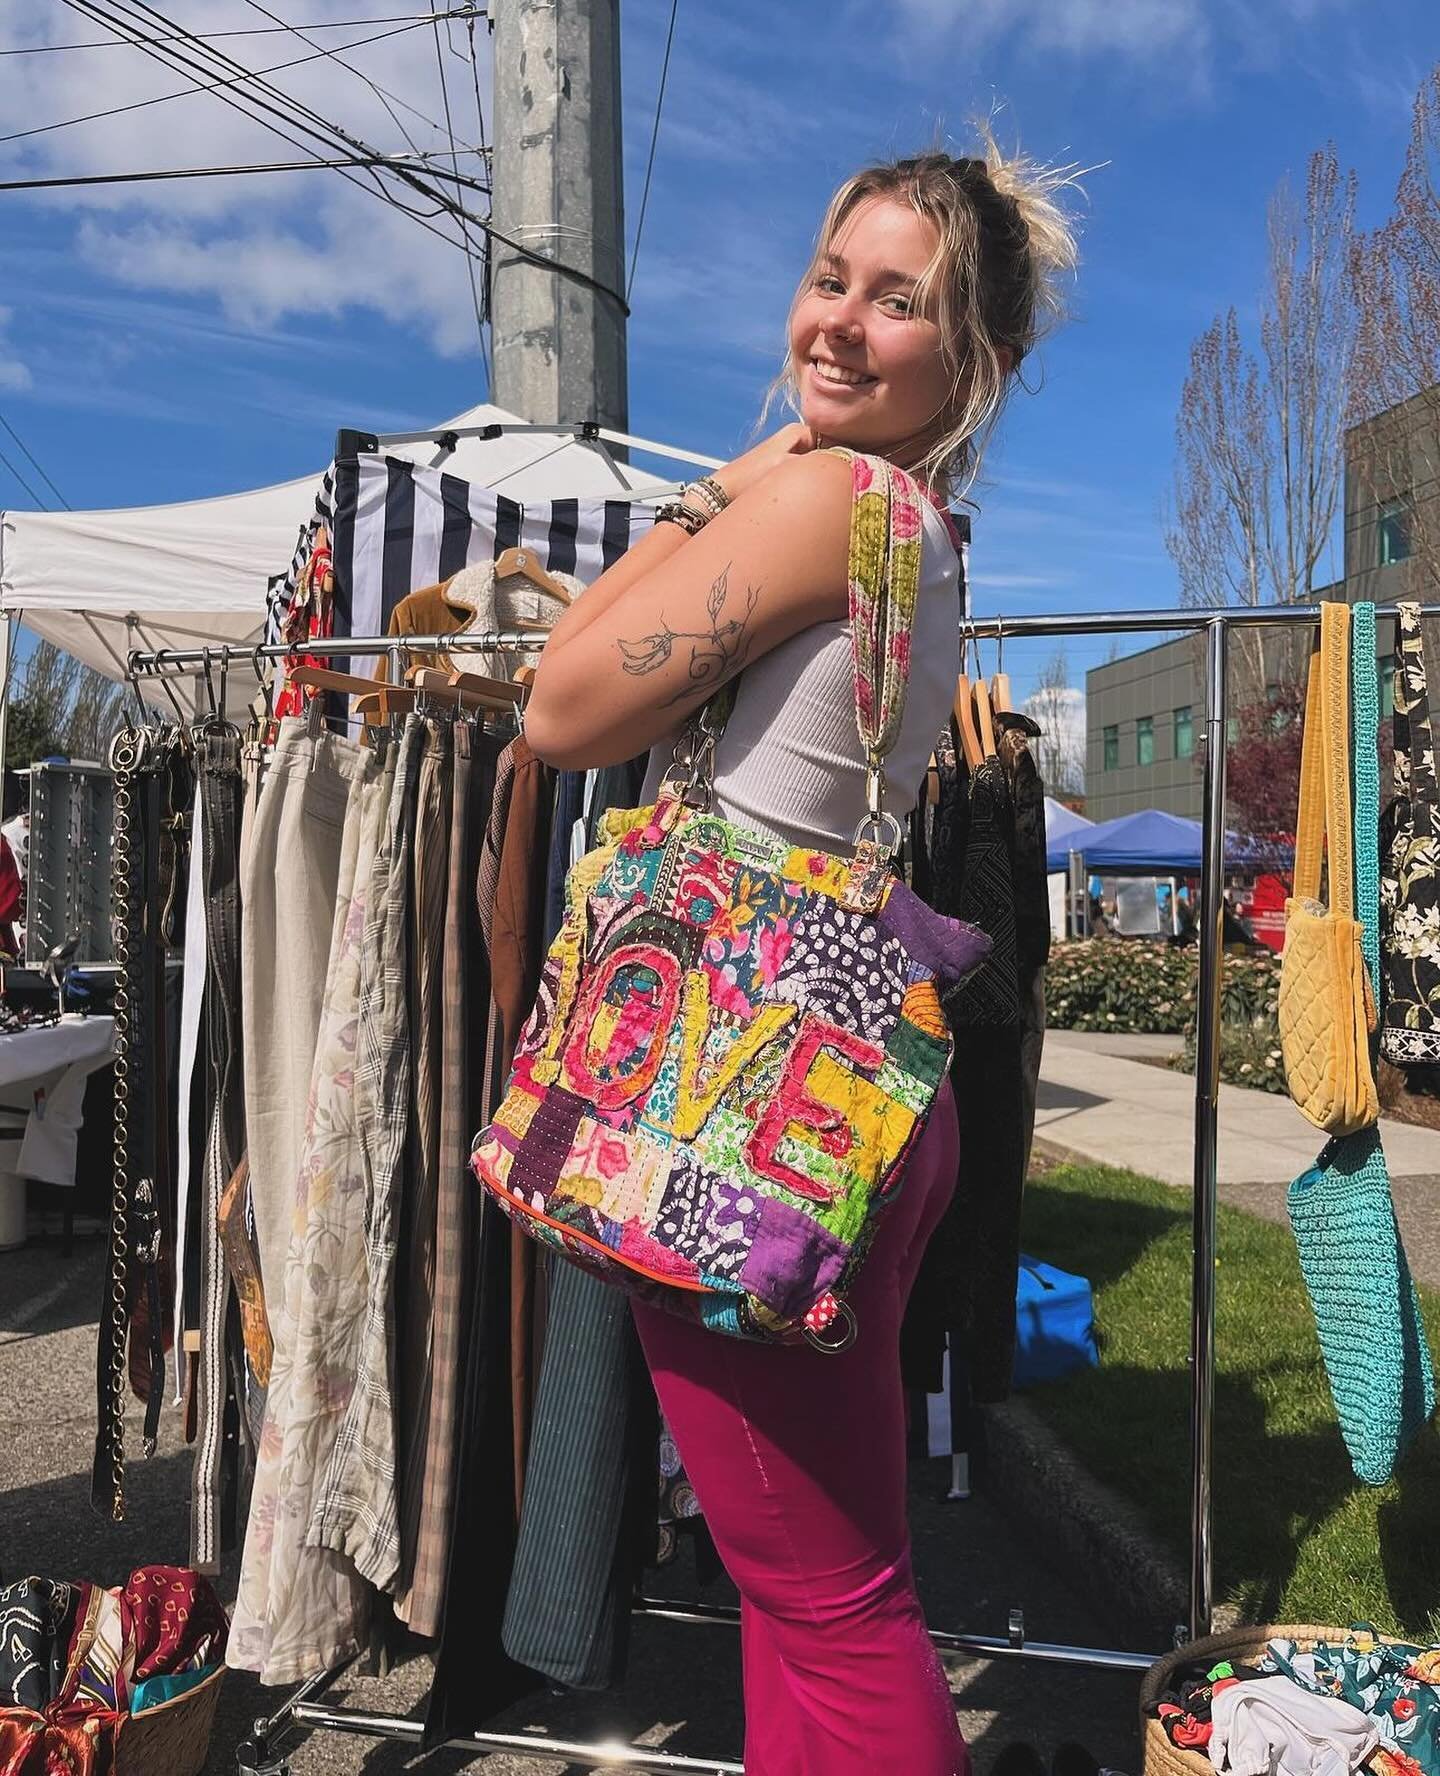 That feeling you get when you buy something second hand at your favorite flea market! Give those vintage clothes a new home and closet vs. fast fashion! 📸: @smalltalkvintage #fleamarket #seattlevintagemarket #secondhand #sustainablefashion #vintagec